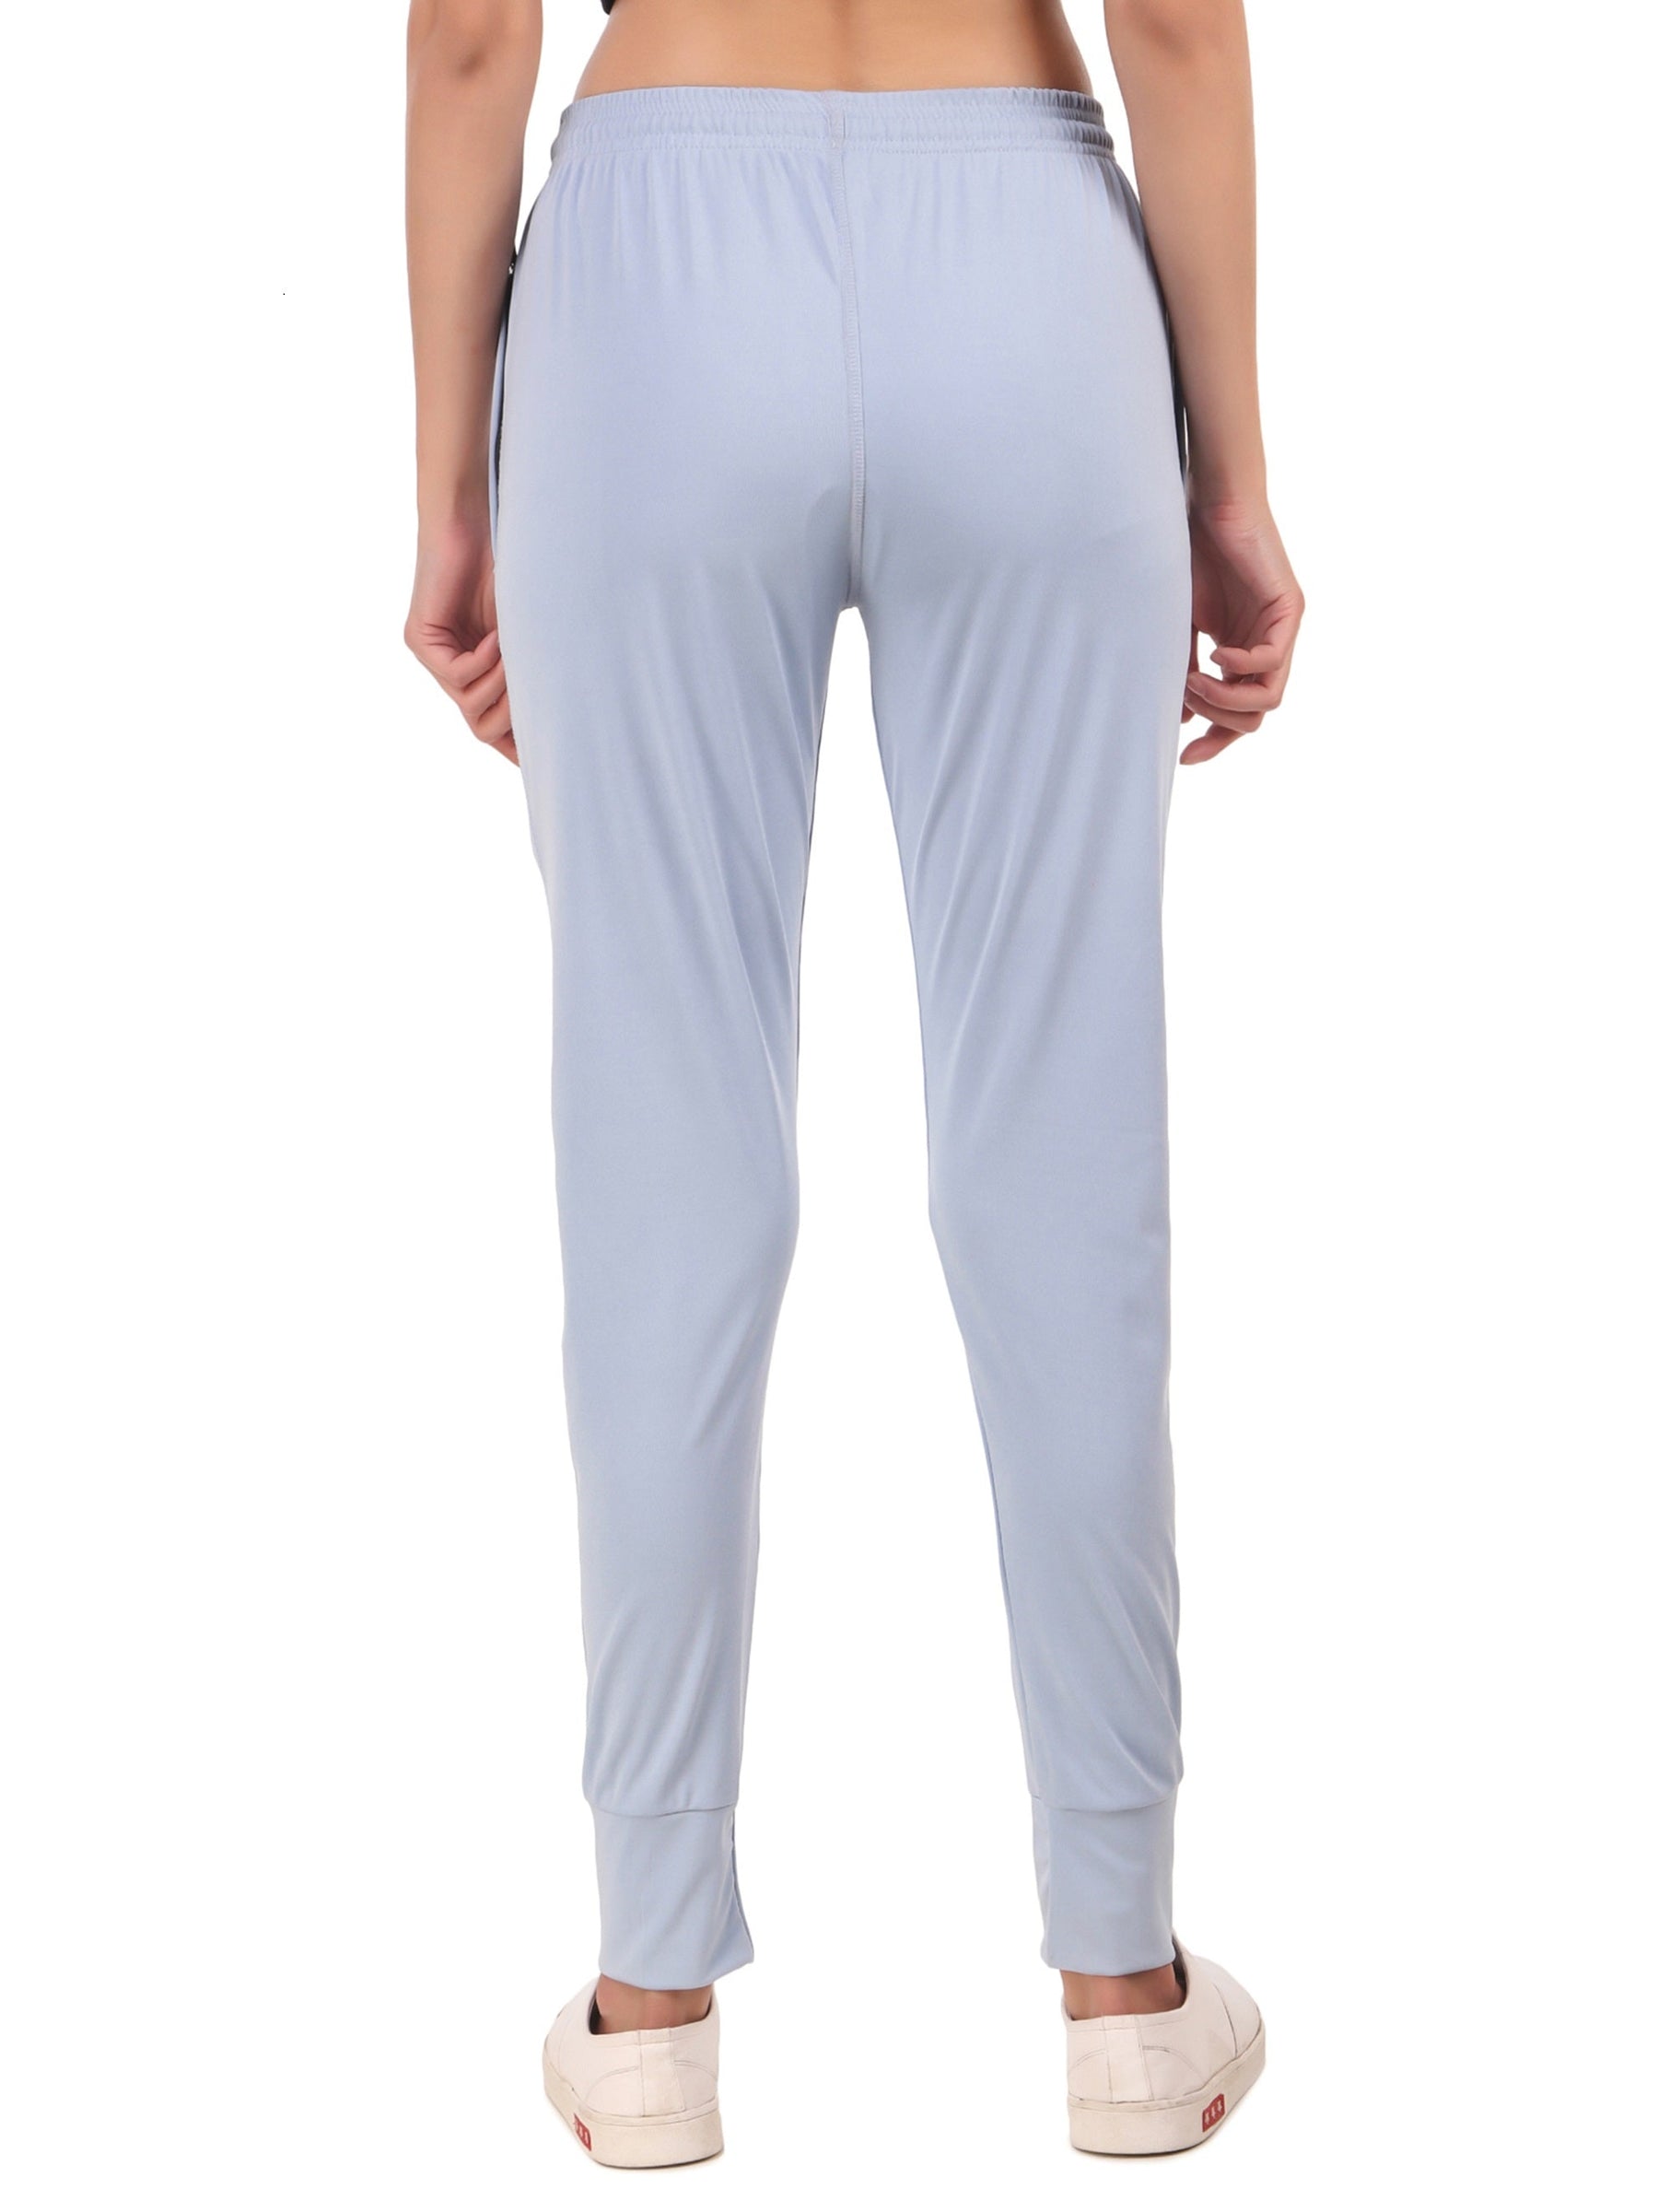 Buy Calvin Klein Calvin Klein Jeans Women Off White Relaxed Fit Solid Track  Pants at Redfynd